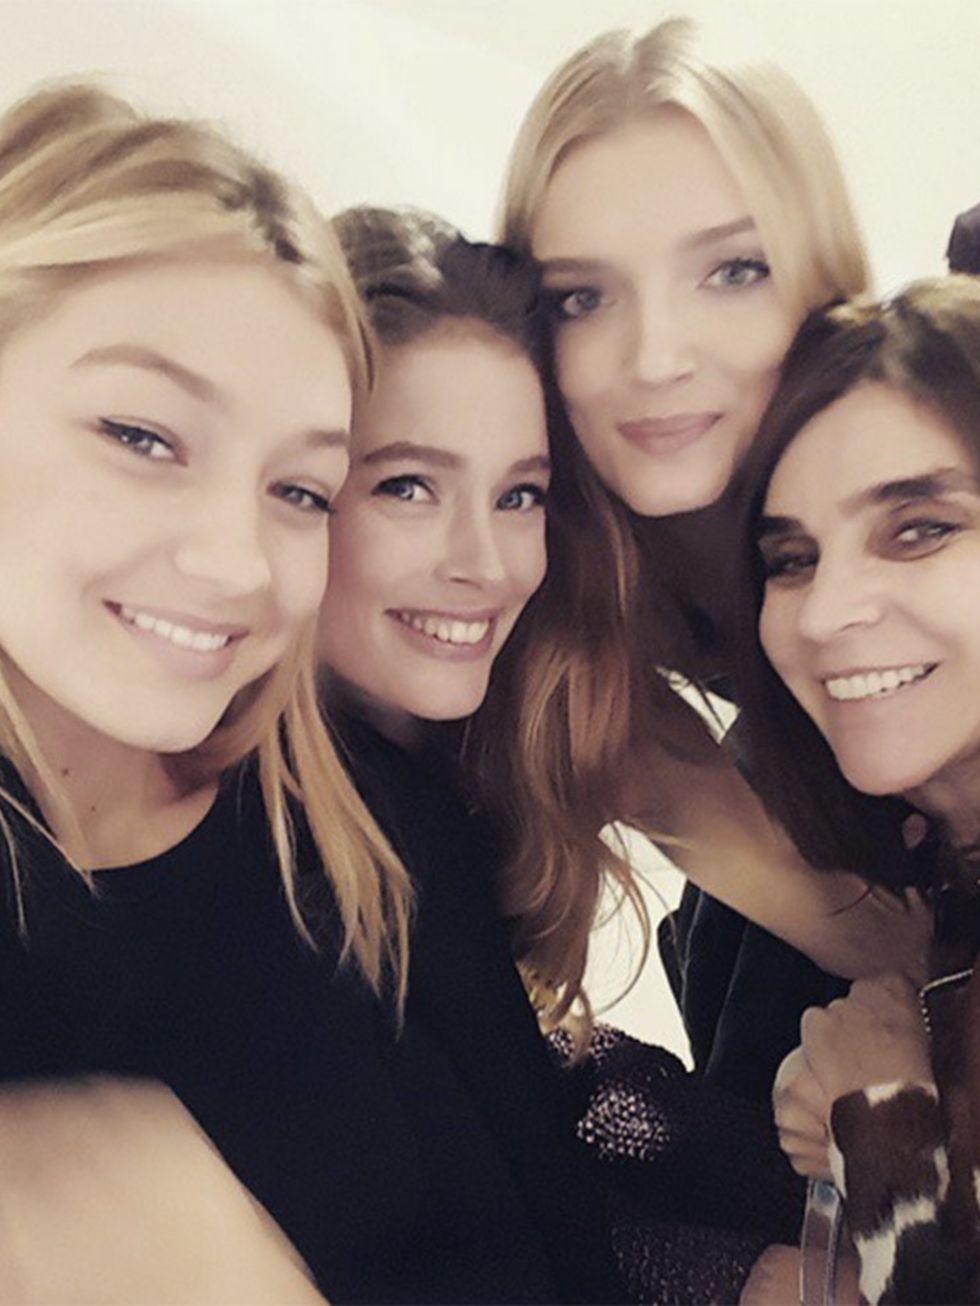 Gigi Hadid @gigihadid

The techy in all of us came out last night...